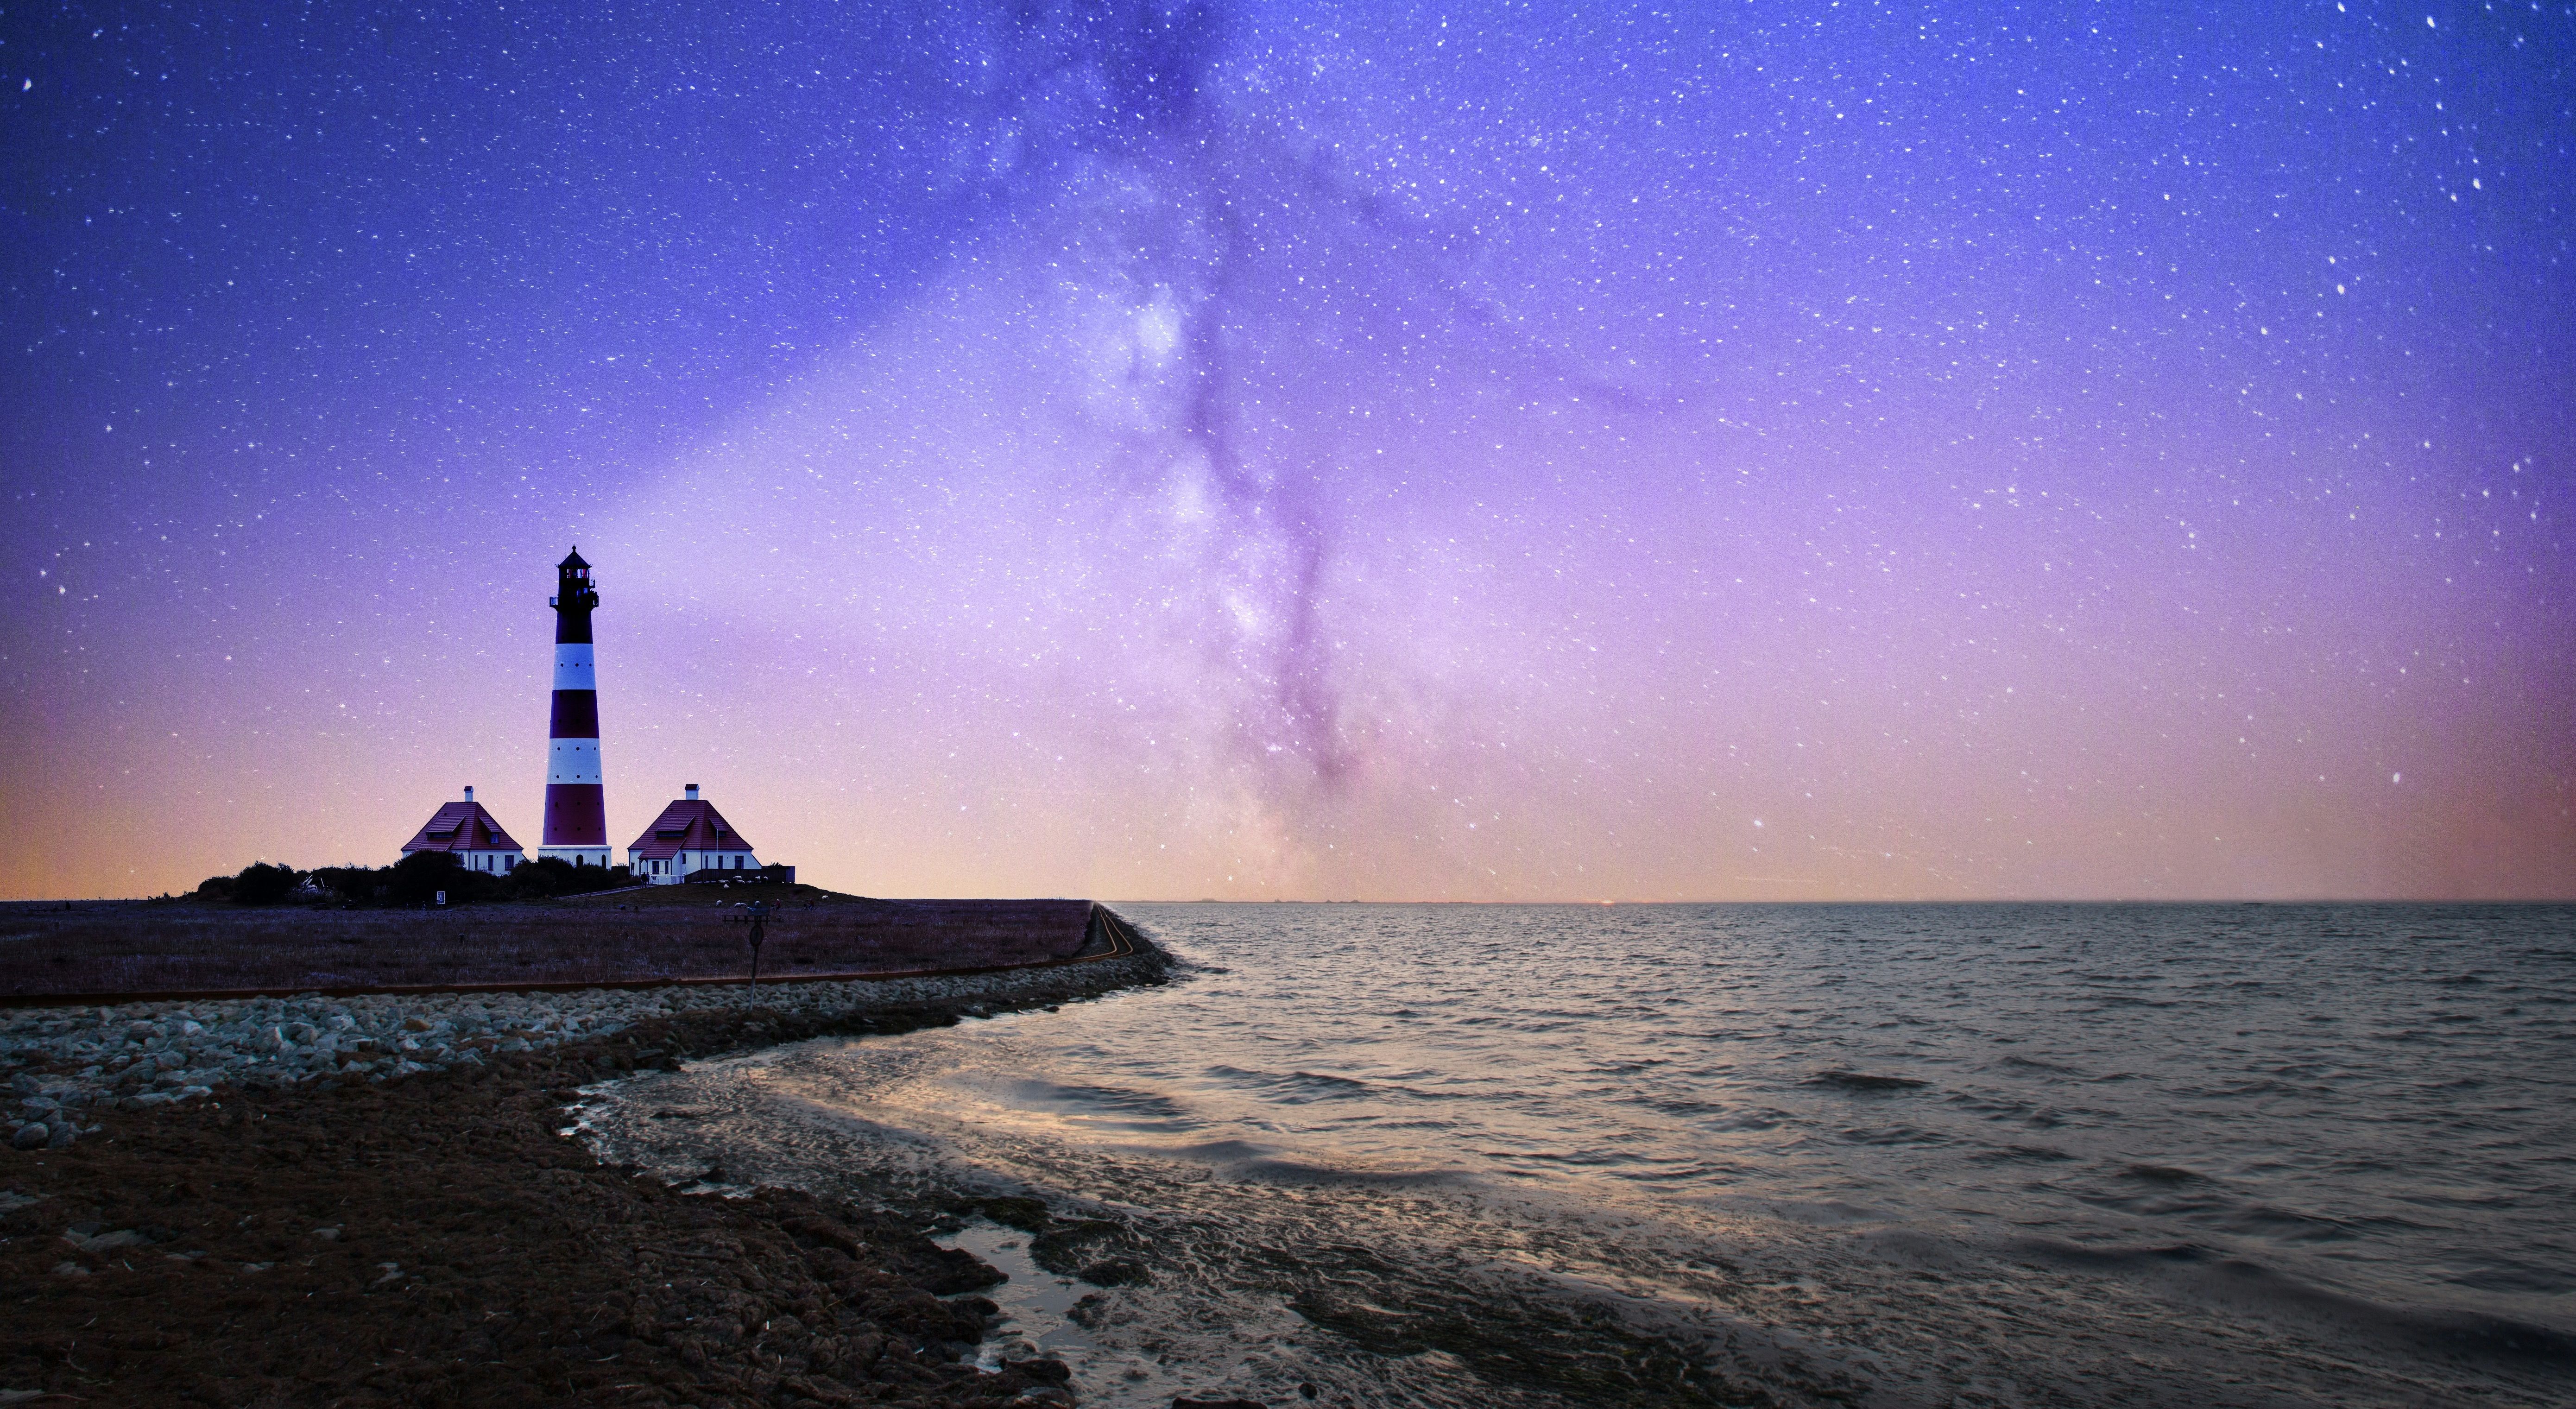 A red and white striped lighthouse shining out against the sea backdropped by a purple sky filled with nebula.